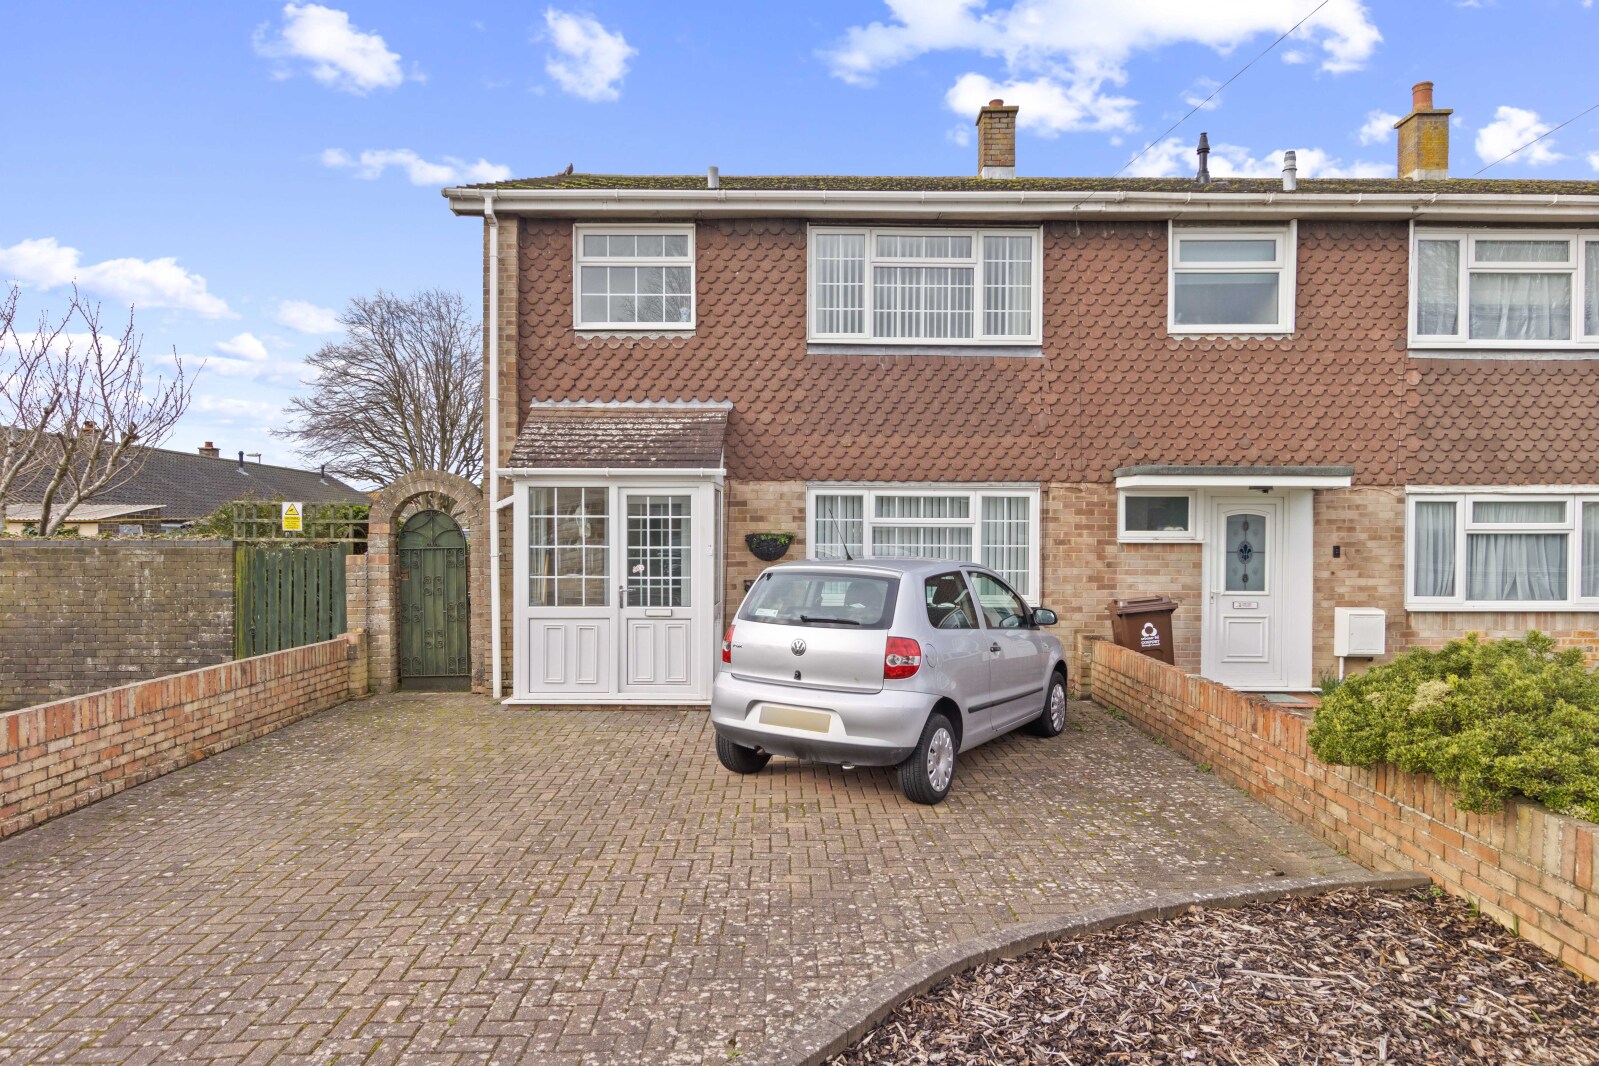 3 bed house for sale in Wych Lane, Bridgemary, Gosport  - Property Image 1